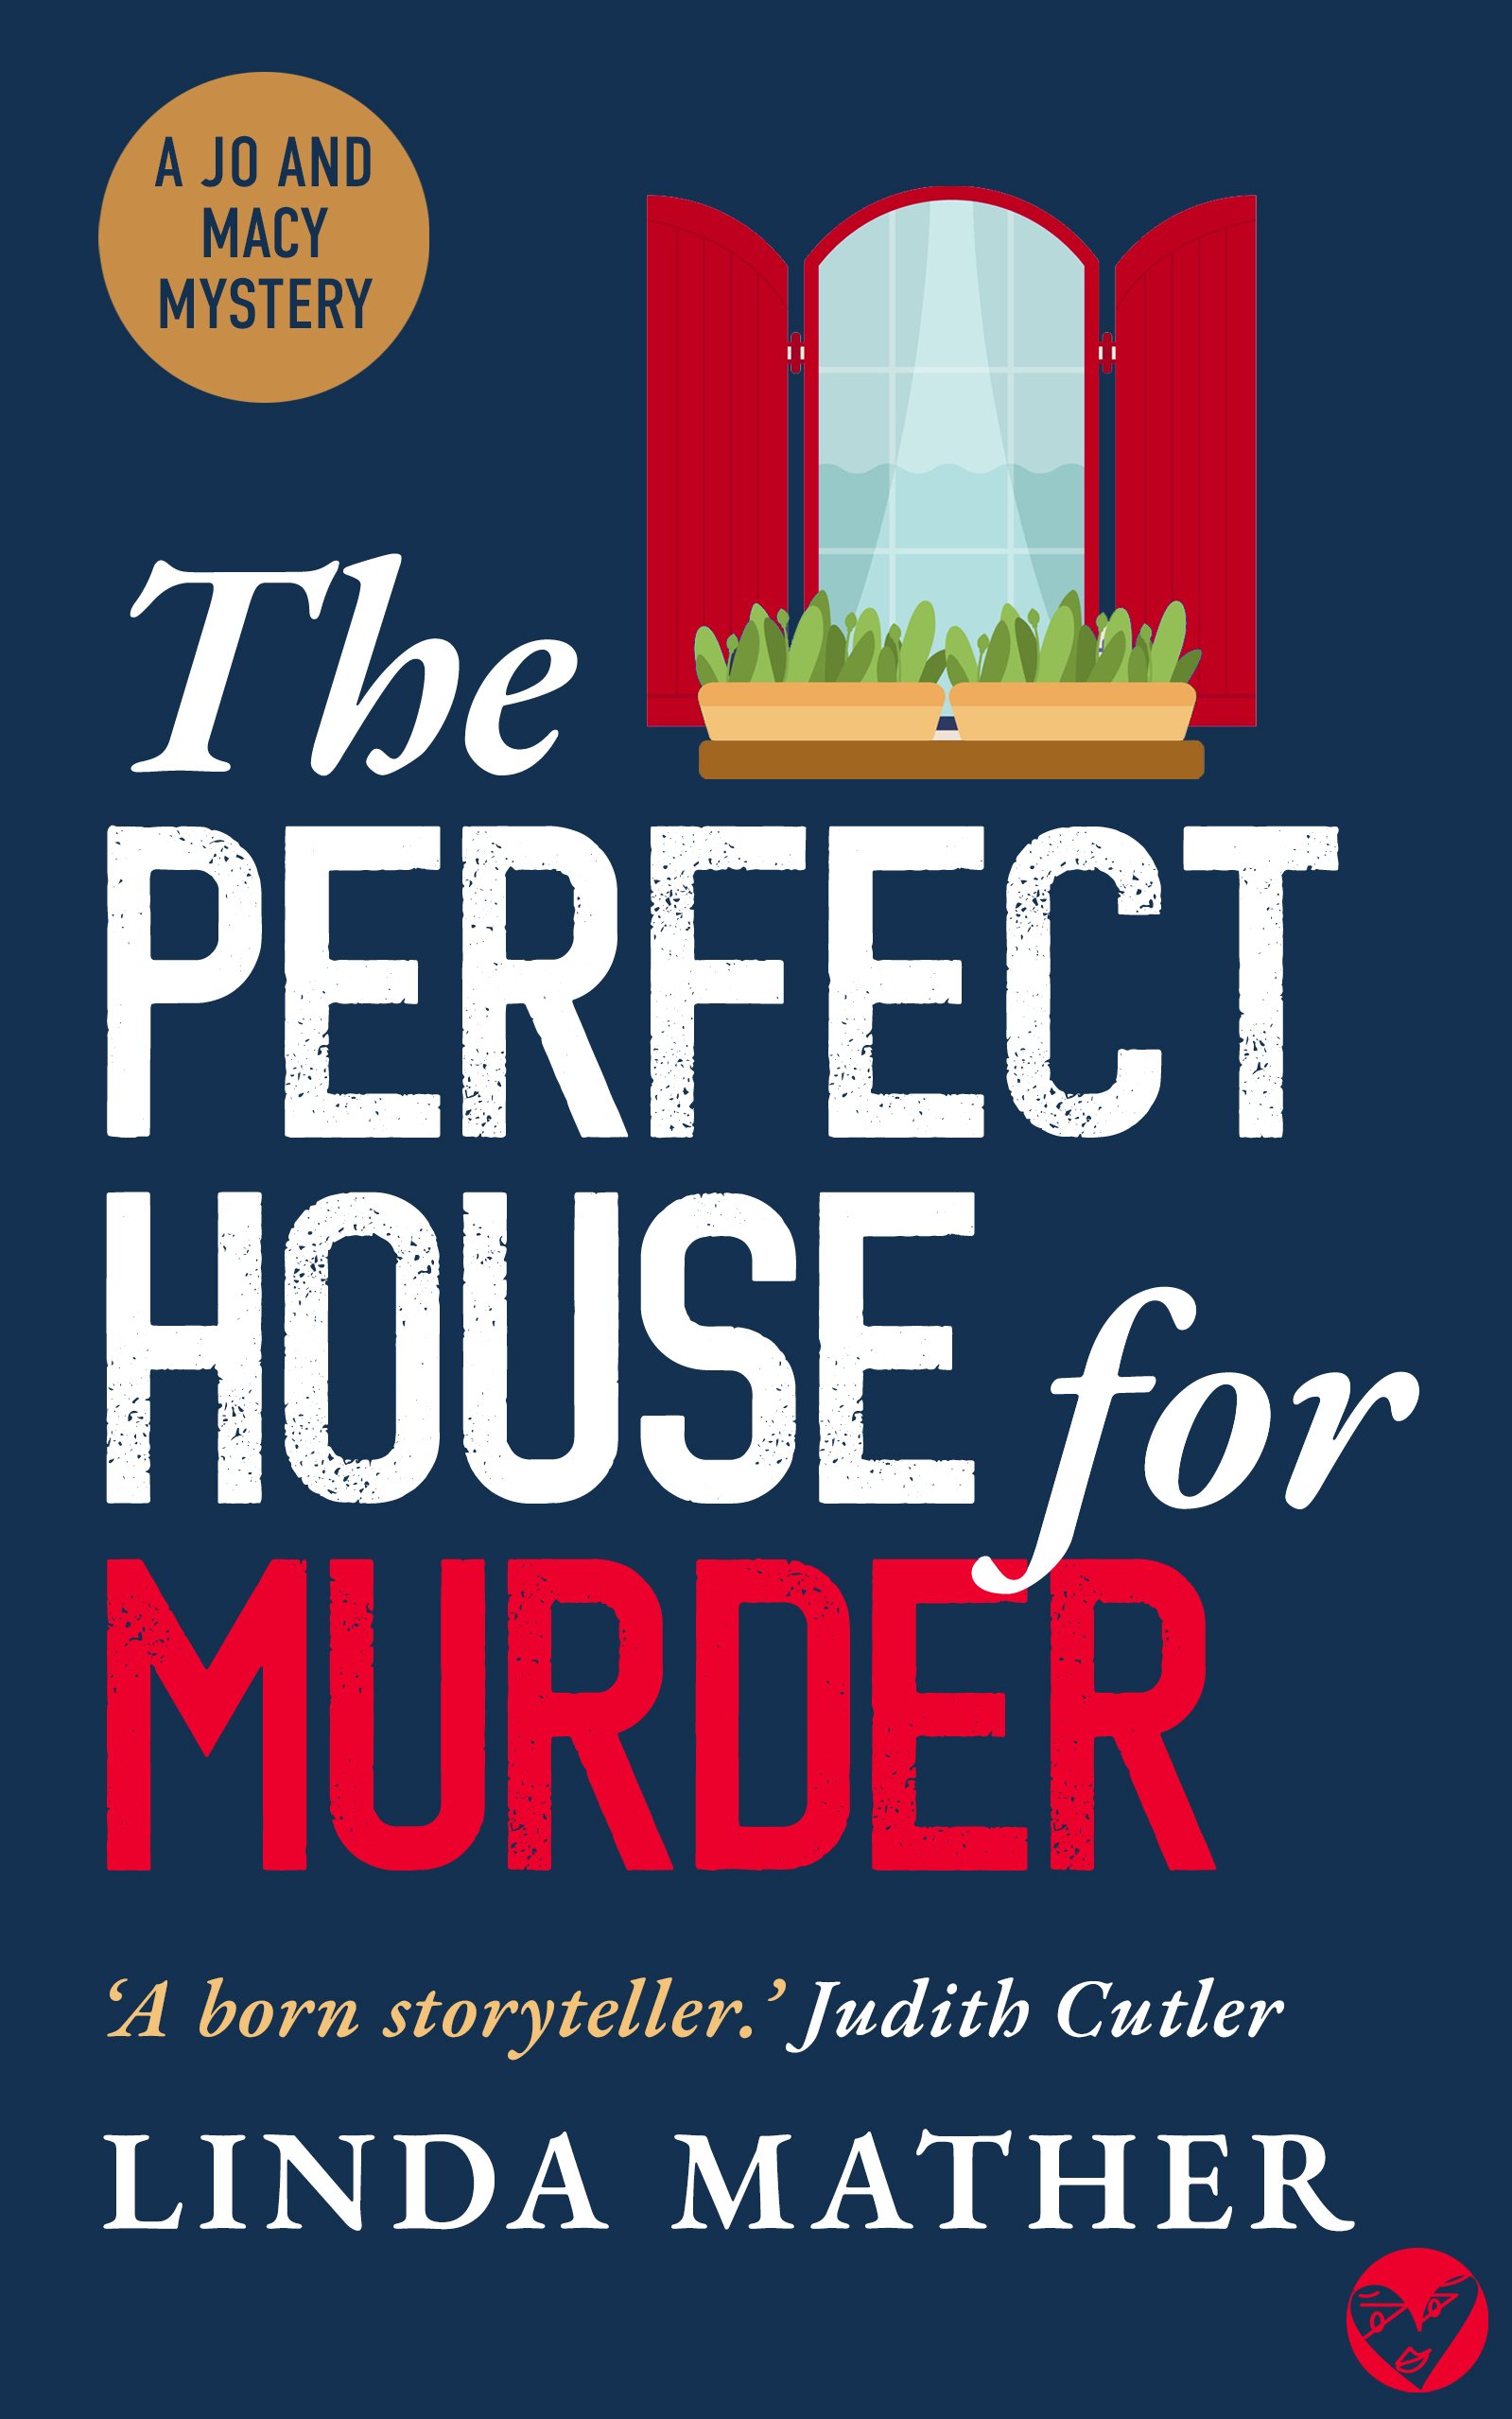 THE PERFECT HOUSE FOR MURDER Cover publish.jpg